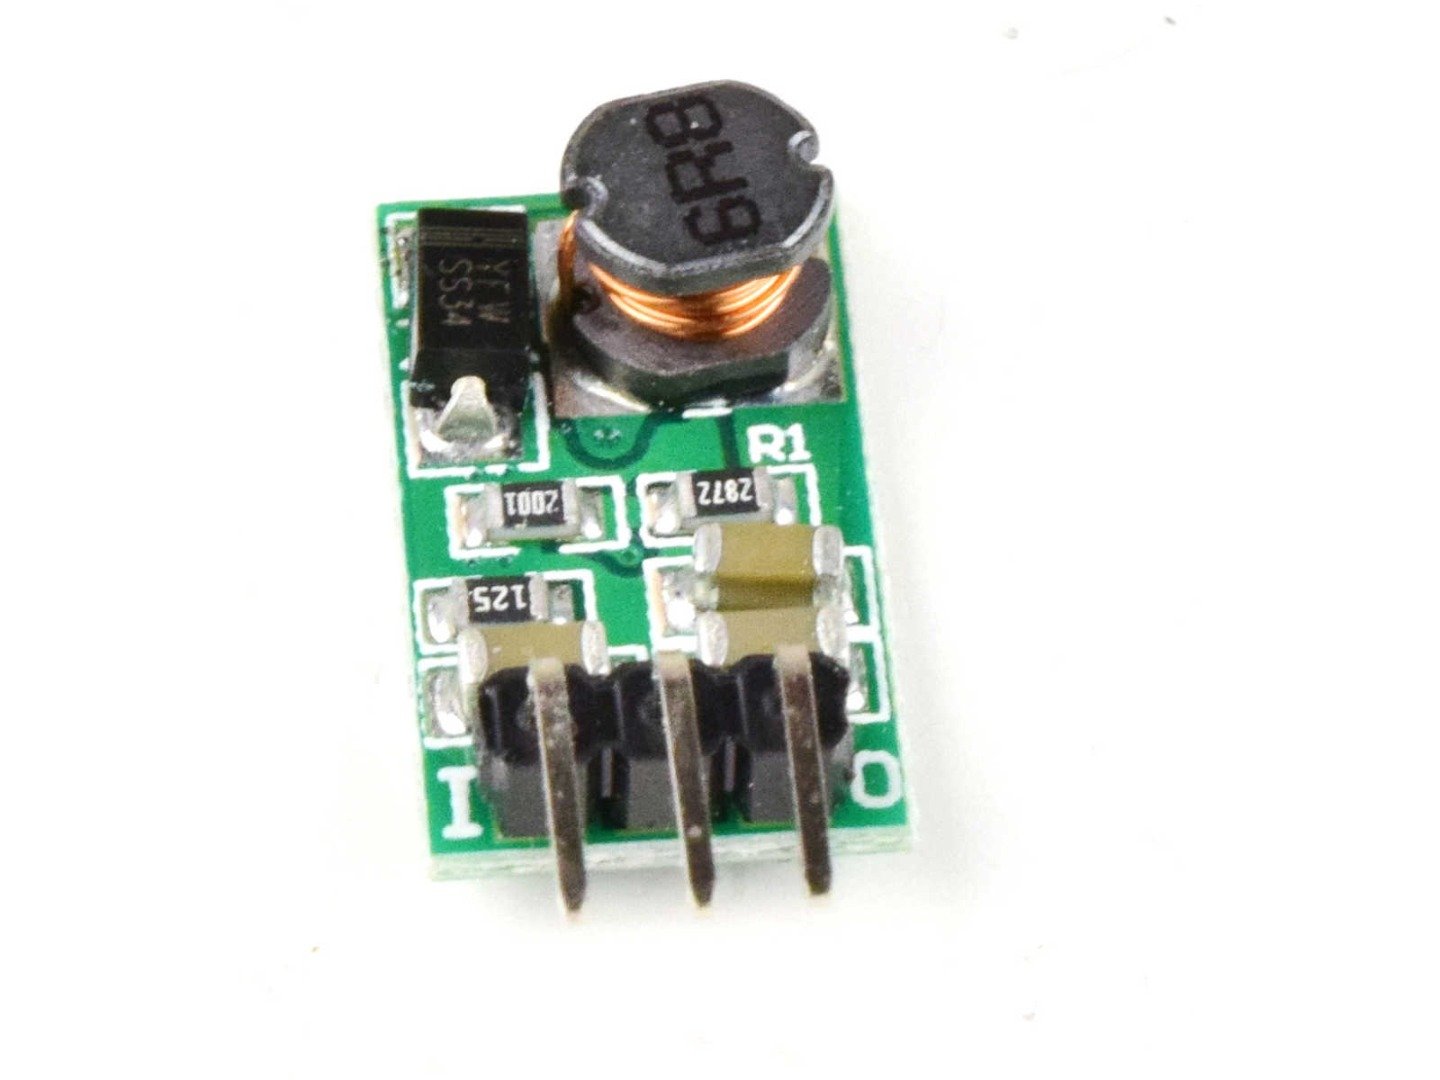 DC-DC Switching Regulator 12V 0.5A – TO-220 pinout – 7812 Replacement 6